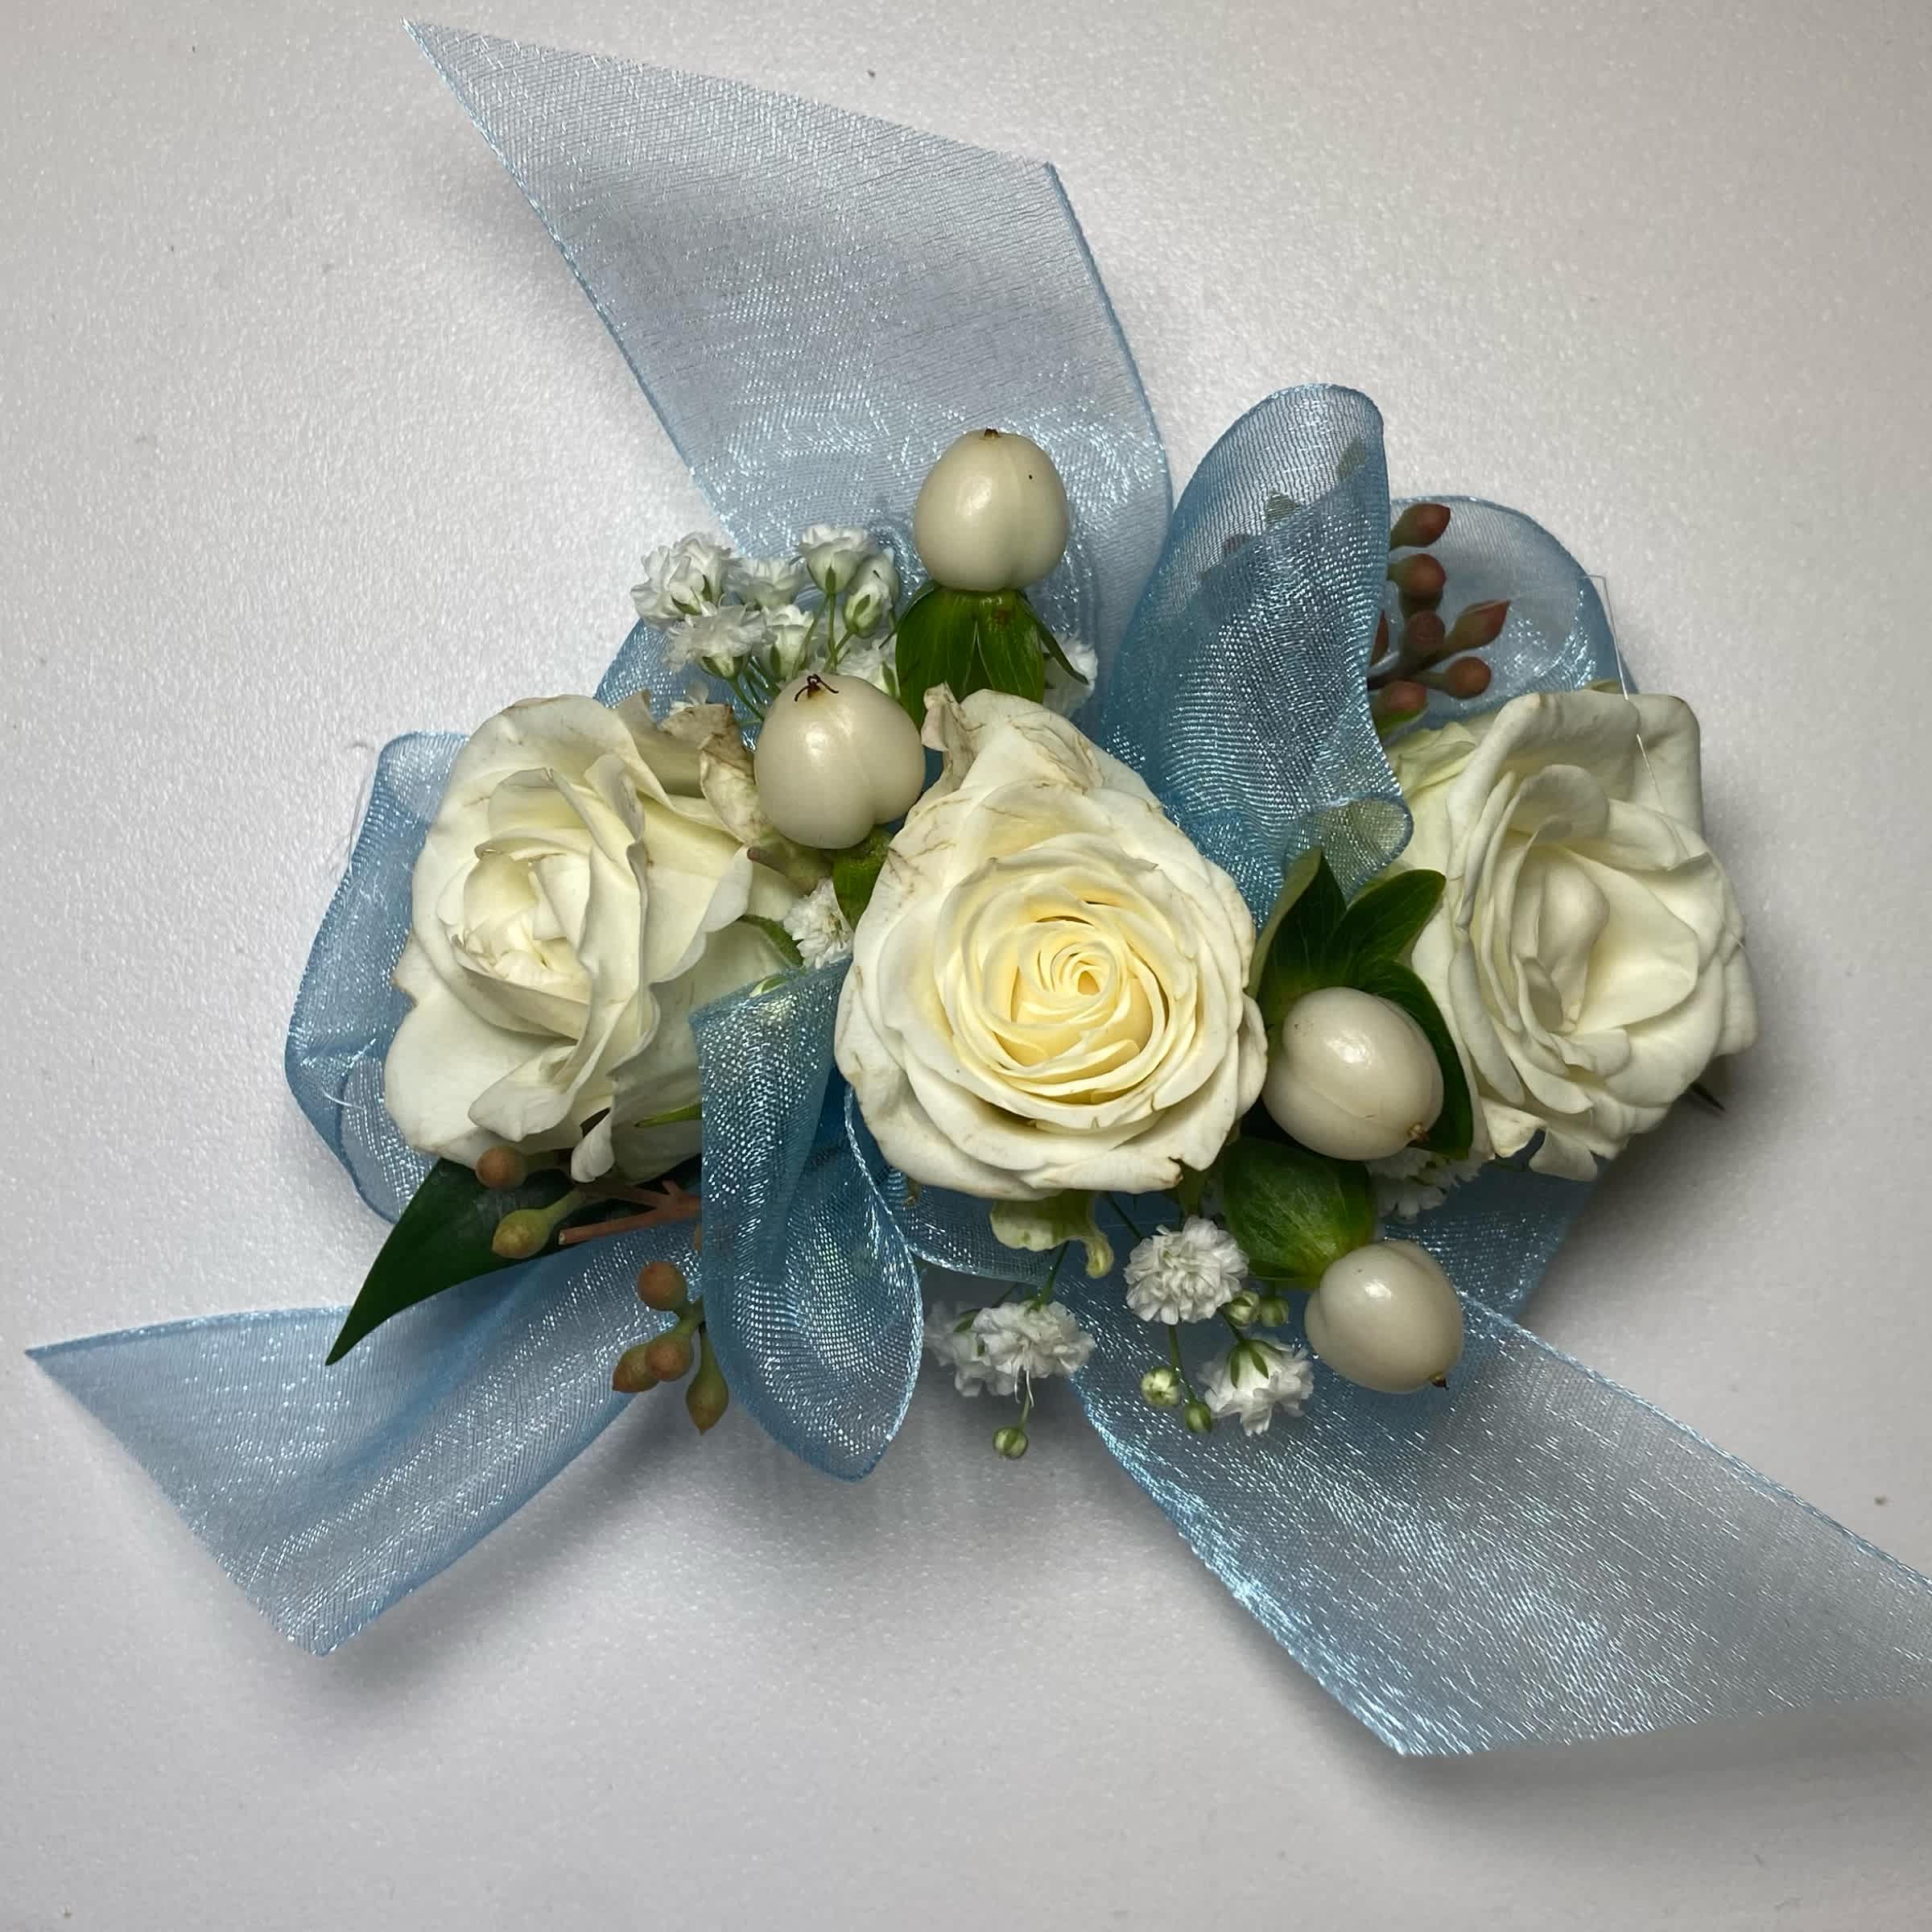 Baby Blue/ White Rose Wrist Corsage - Prom/ Wedding - This White Rose Corsage Includes an Adult Size Elastic Wristband, Baby Blue Chiffon Ribbon, White Spray Roses, Hypericum Berries, Gentle Greenery and Seeded Eucalyptus. Or as Similar as Possible.